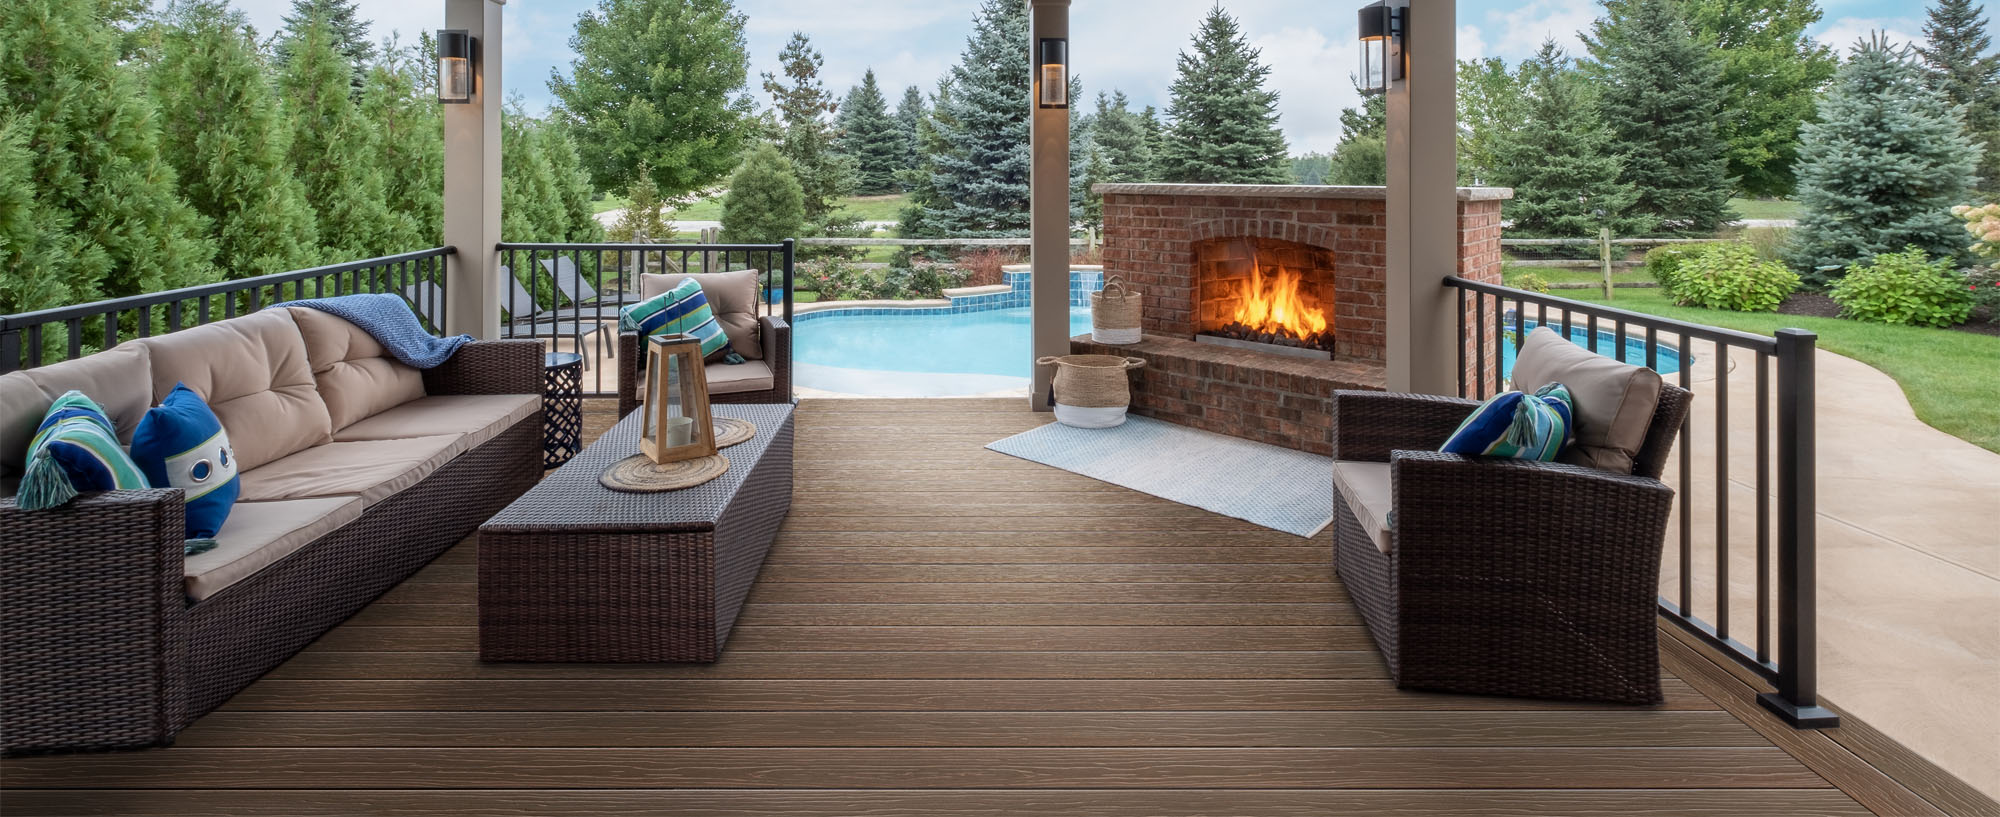 backyard composite decking with fireplace